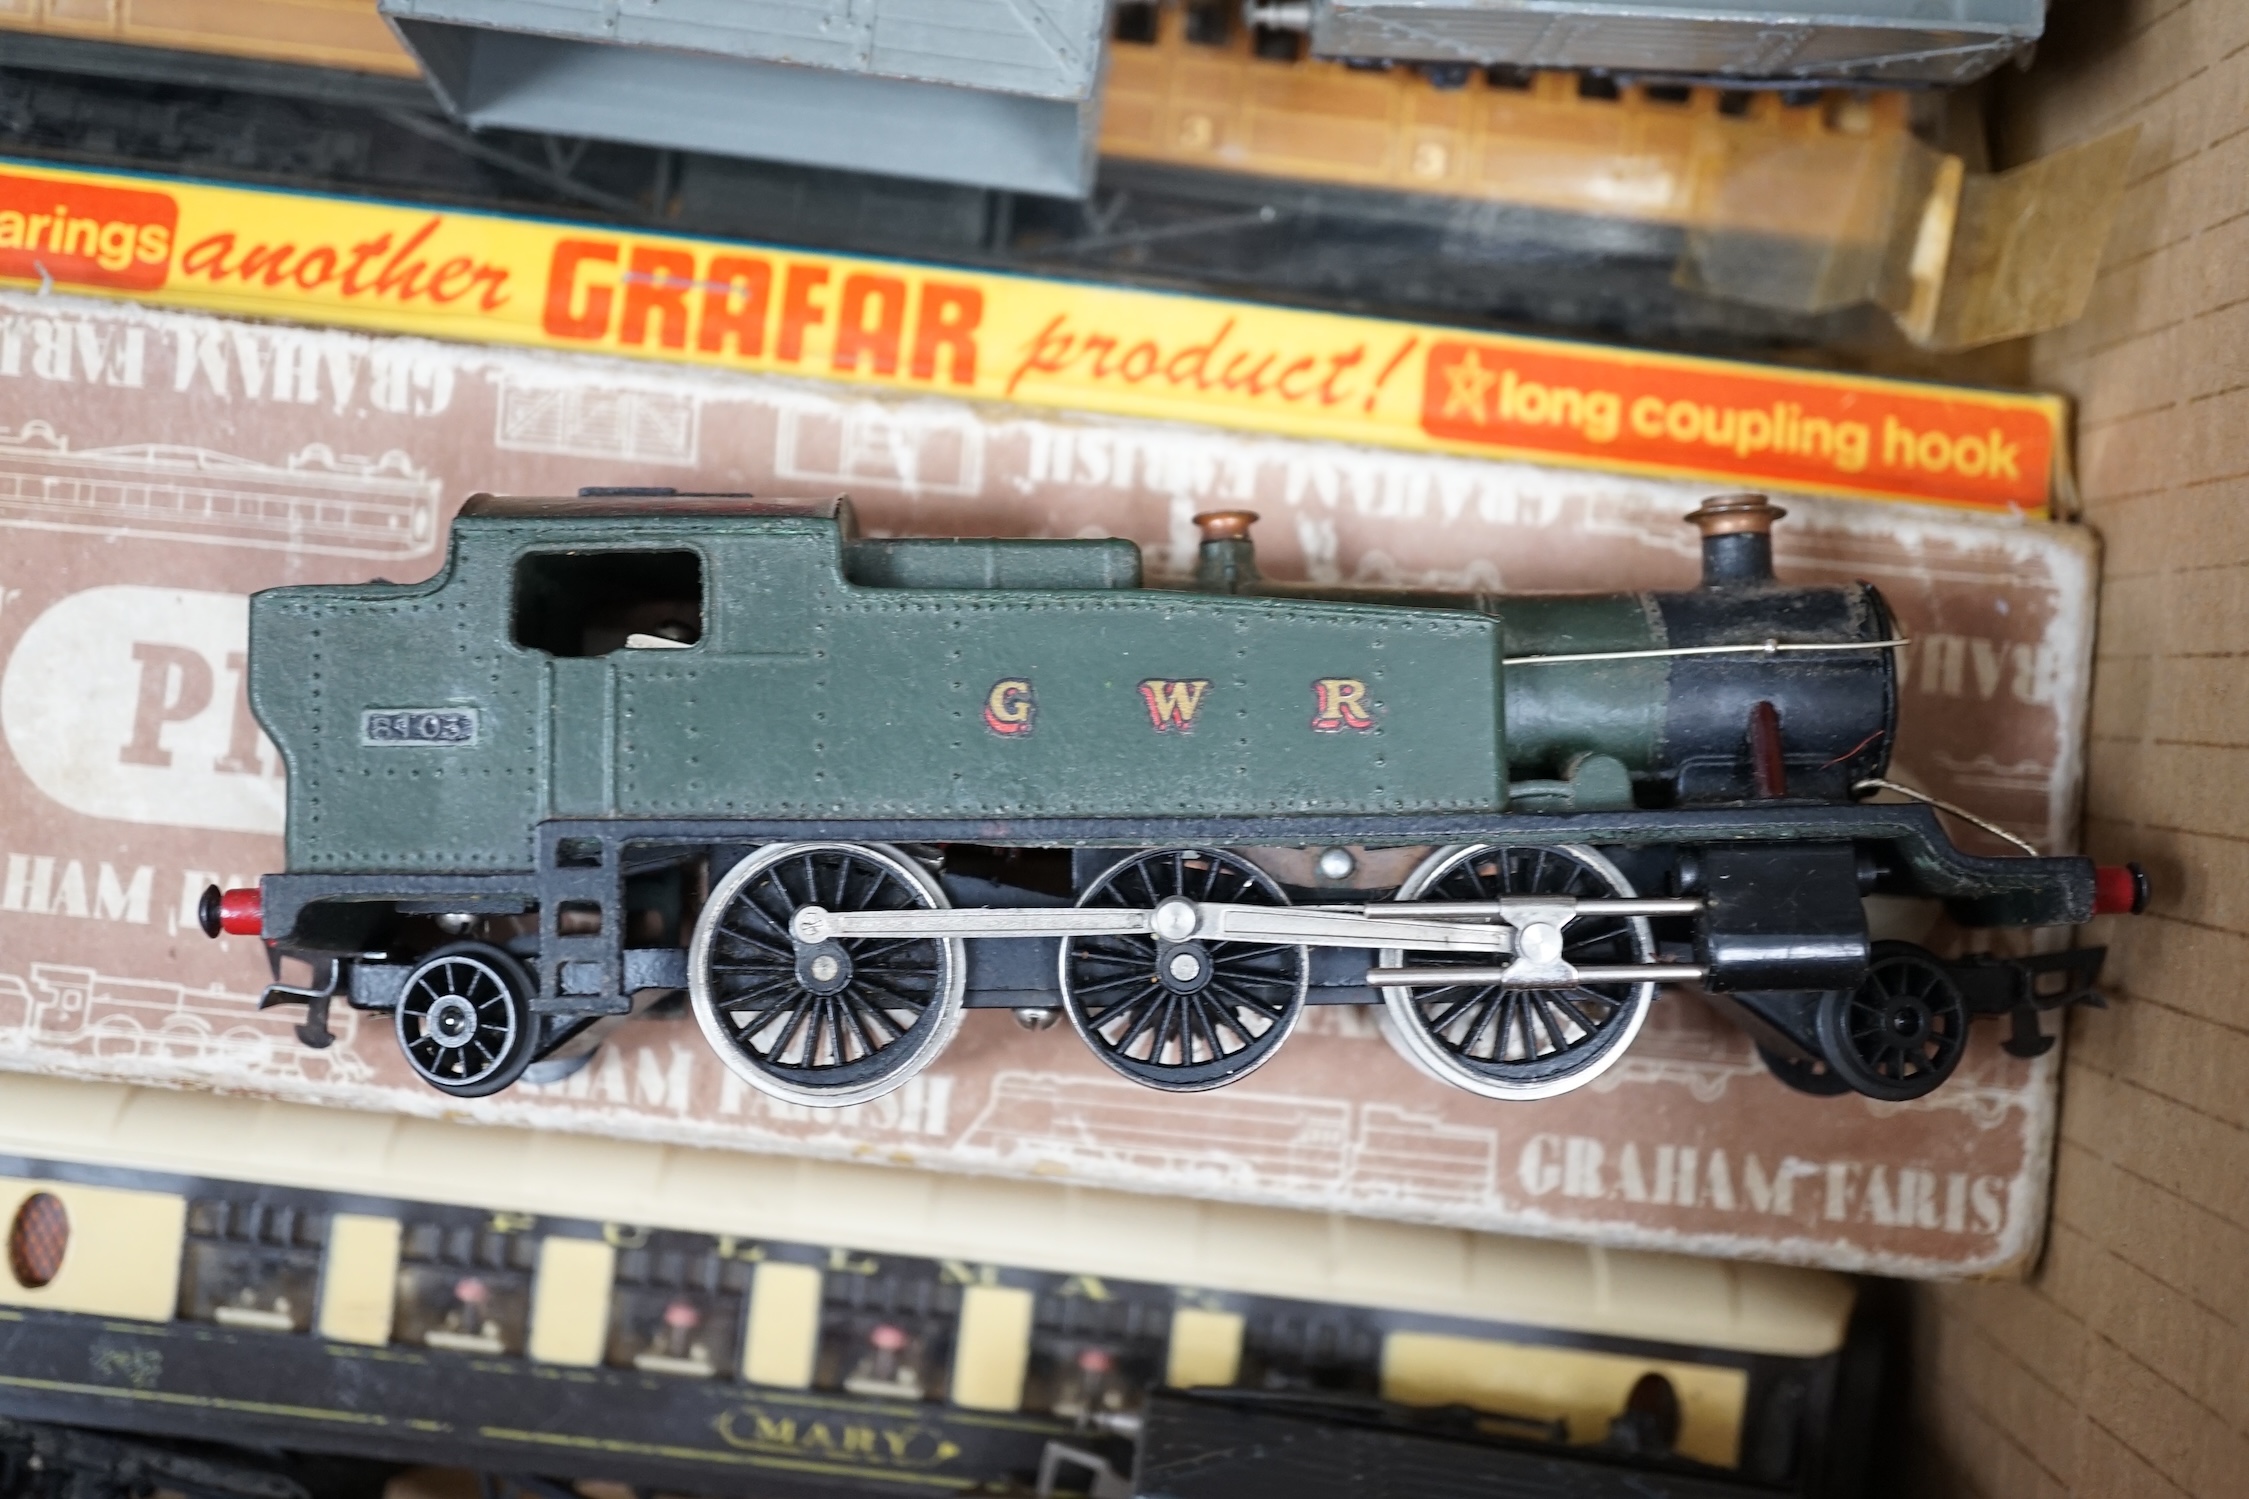 A collection of 00 gauge model Railway by Graham Farish, Exley, etc. including two locomotives; a GWR Prairie Tank loco, plus the remains of another, and a BR Class 5 4-6-0 tender loco, two boxed Pullman cars, freight wa